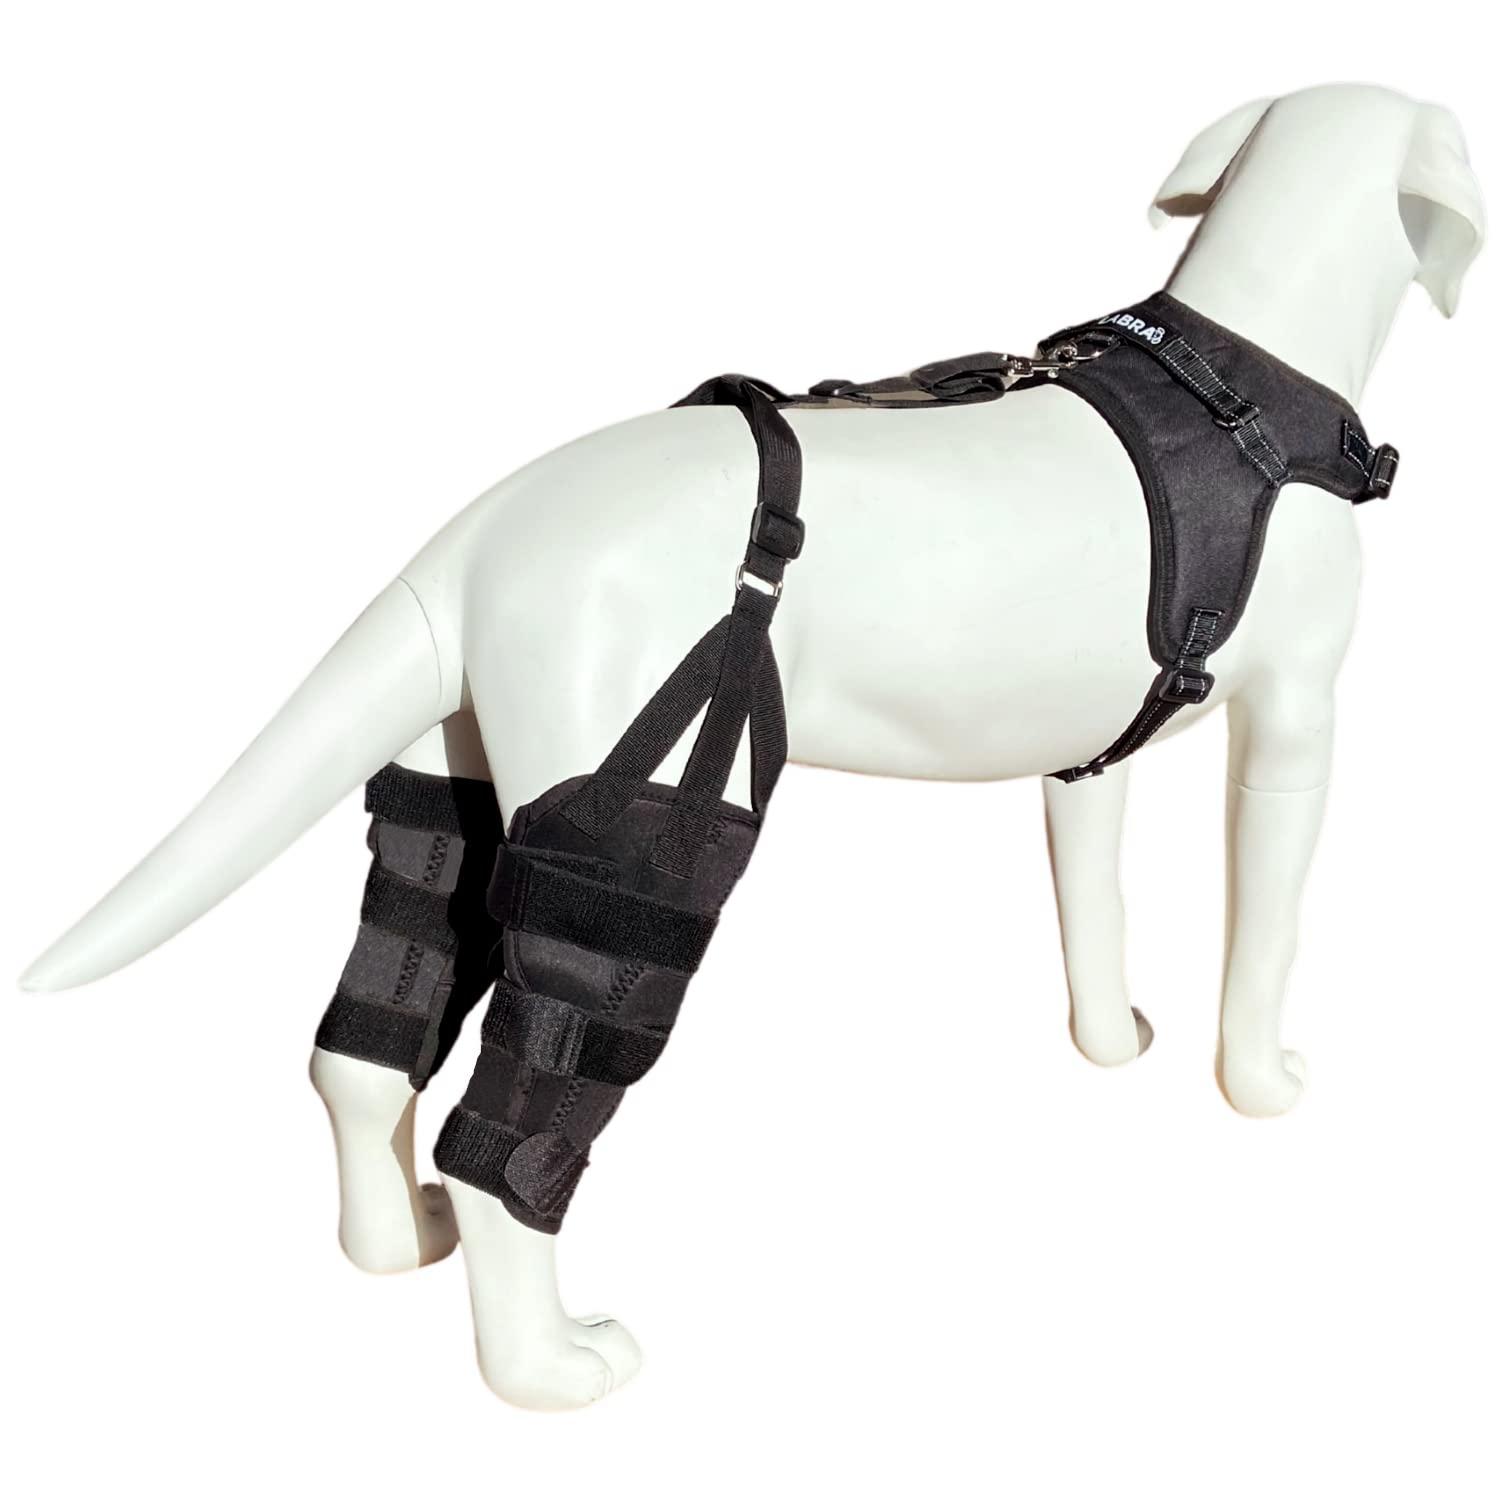 Labra Dog Canine Dual Knee Stifle Brace Wrap, Double Metal Splint Hinged Flexible Support Brace for K9 ACL, CCL, Luxating Patella, Cruciate Ligament Sprains in Back, Rear, Hind Legs - Medium